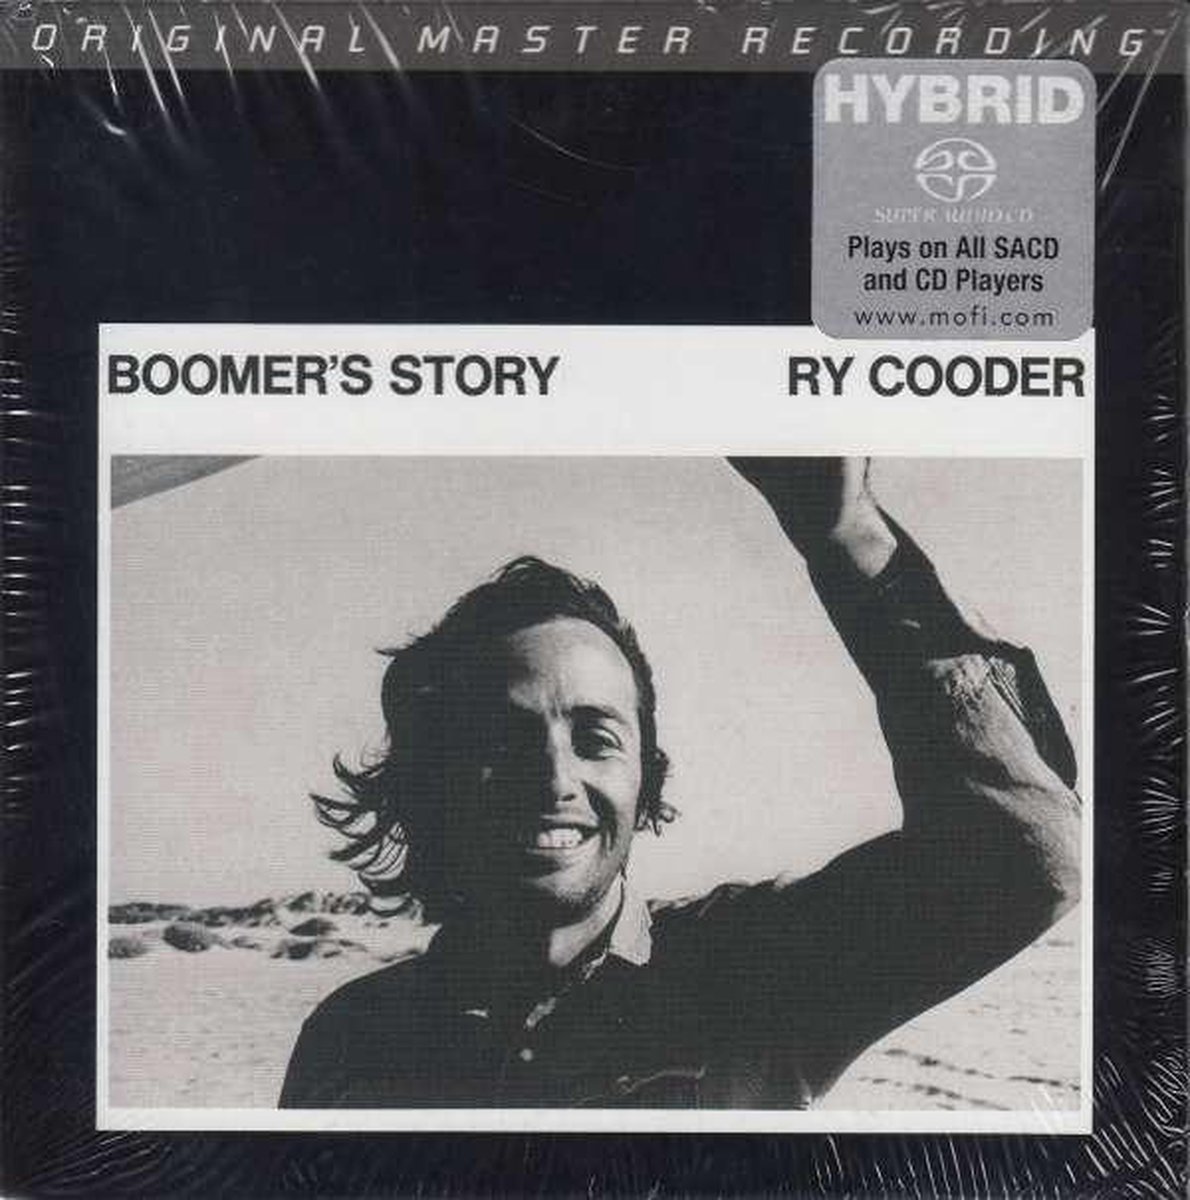 BoomerS Story - Ry Cooder